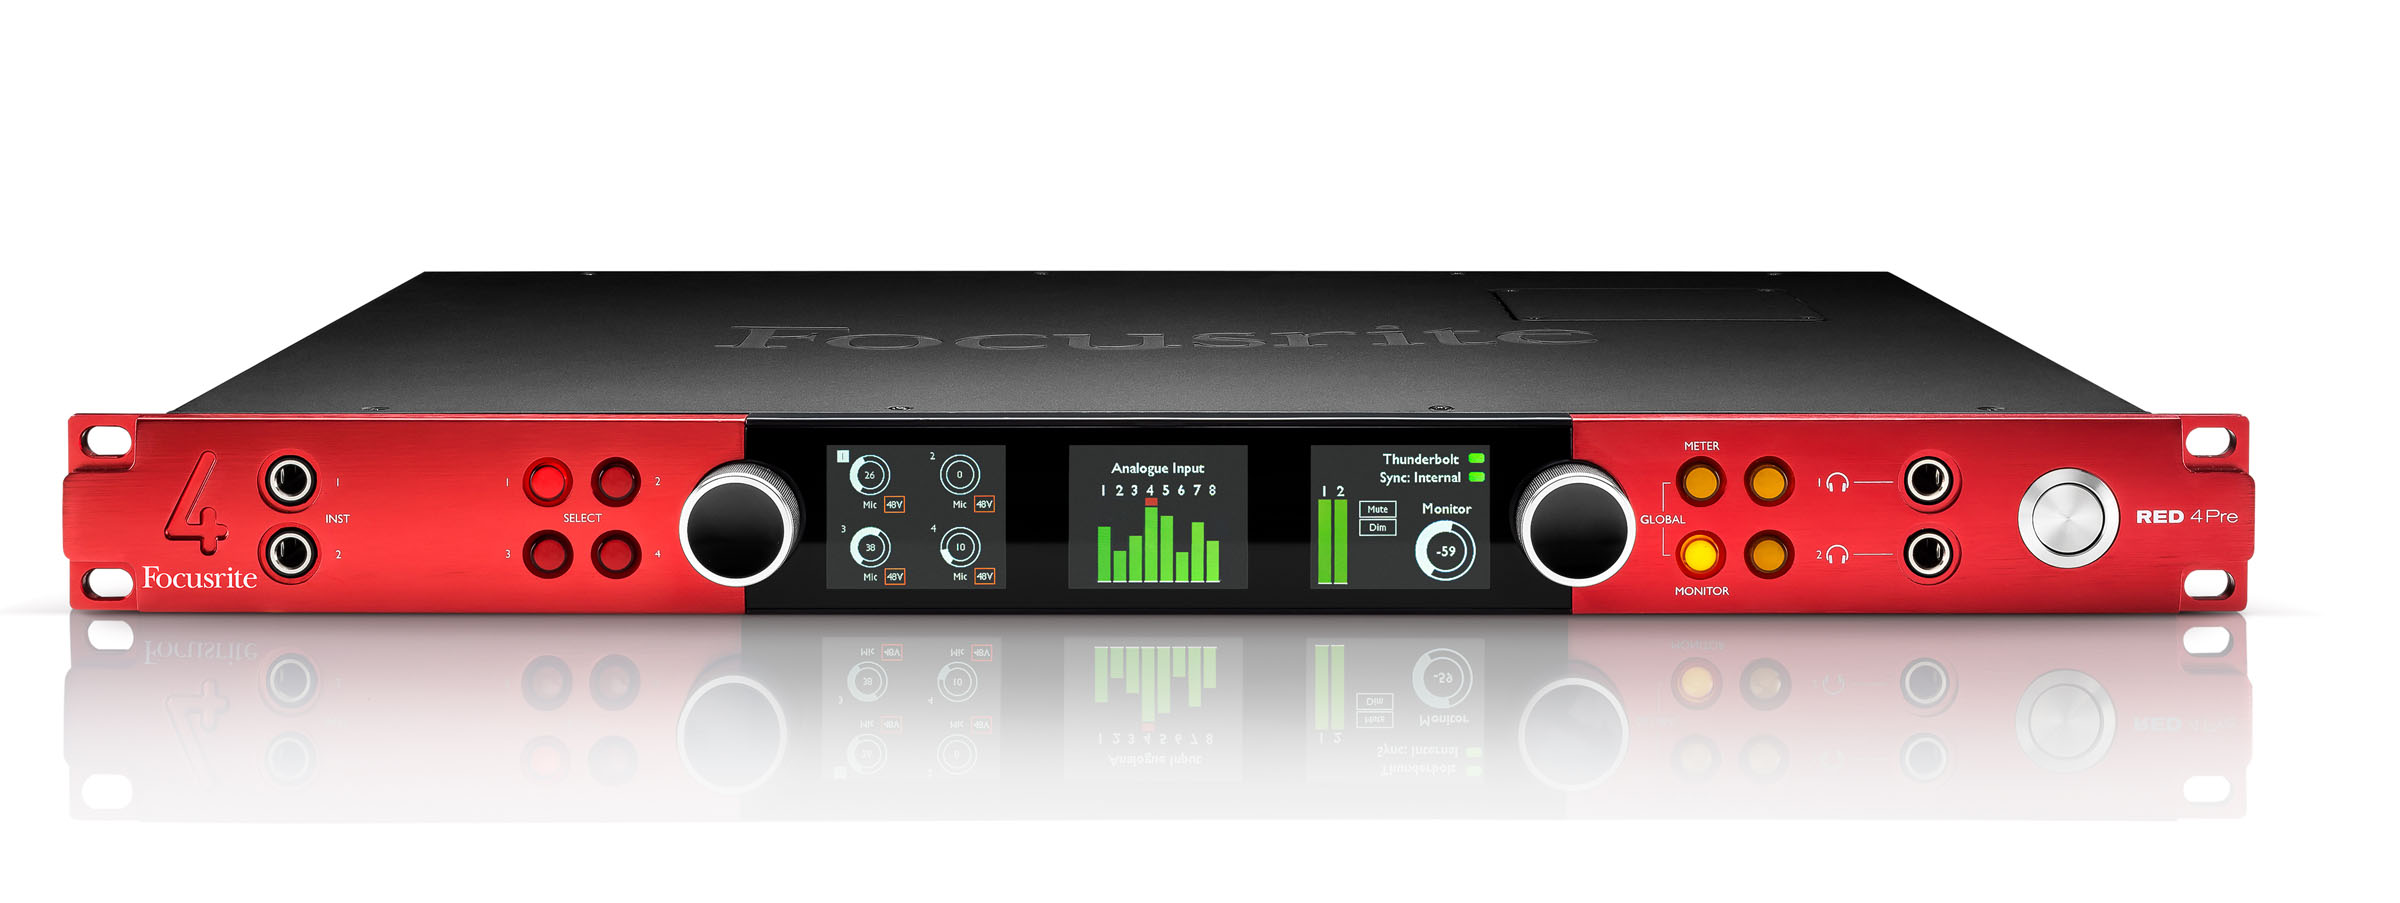 Spectacle på den anden side, Staple Focusrite Launches Advanced Red 4Pre Interface